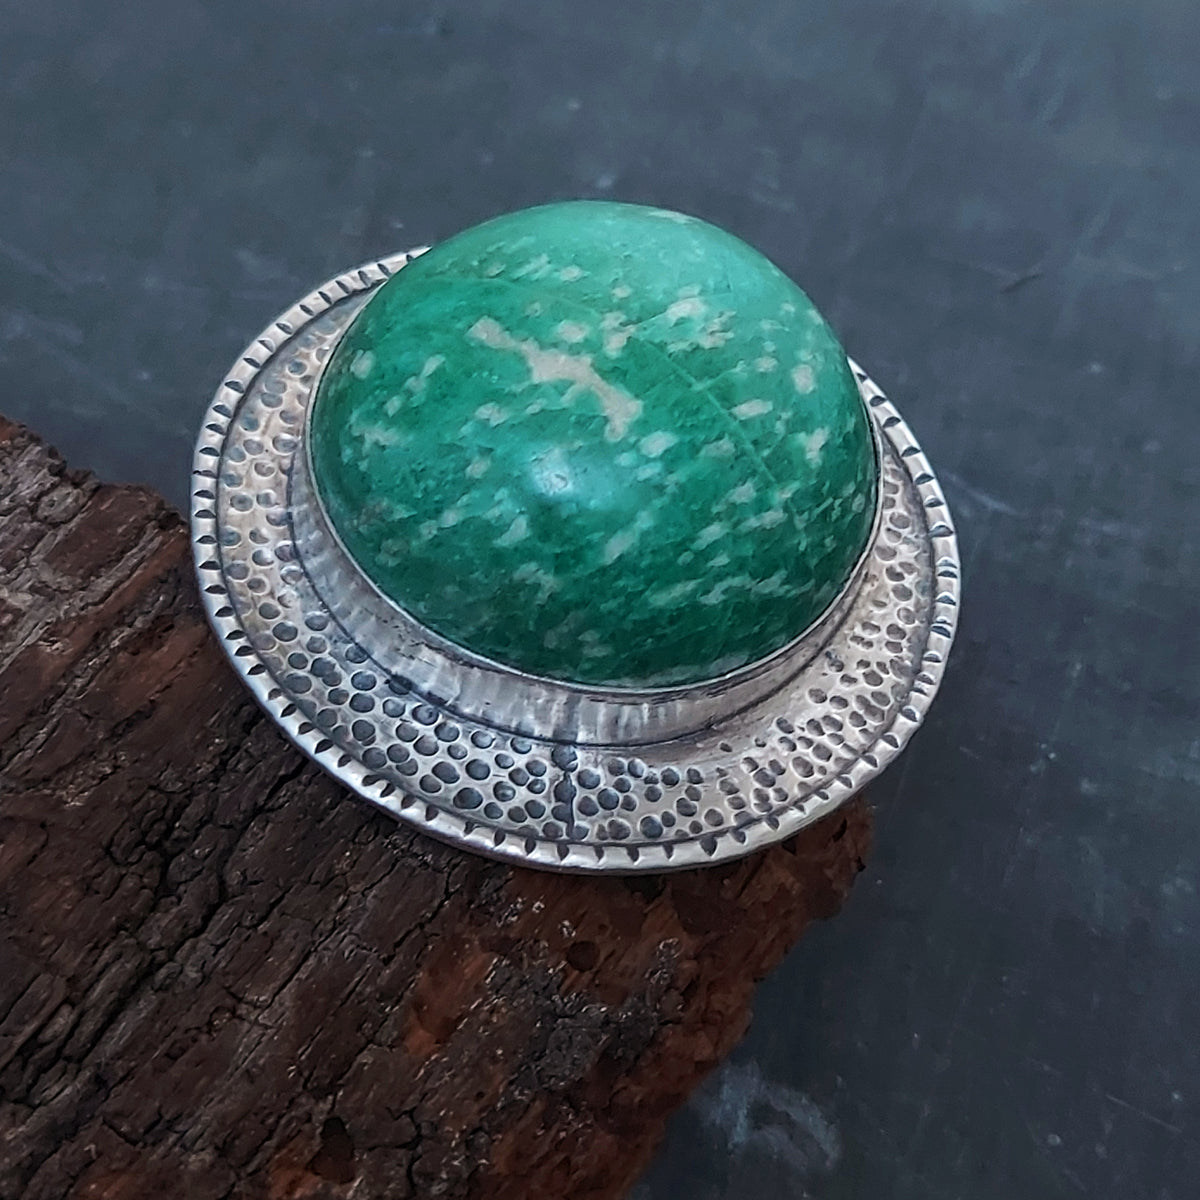 Gemstone retro ring, unique statement ring. amazonite ring, hand fabricated by roff jewellery